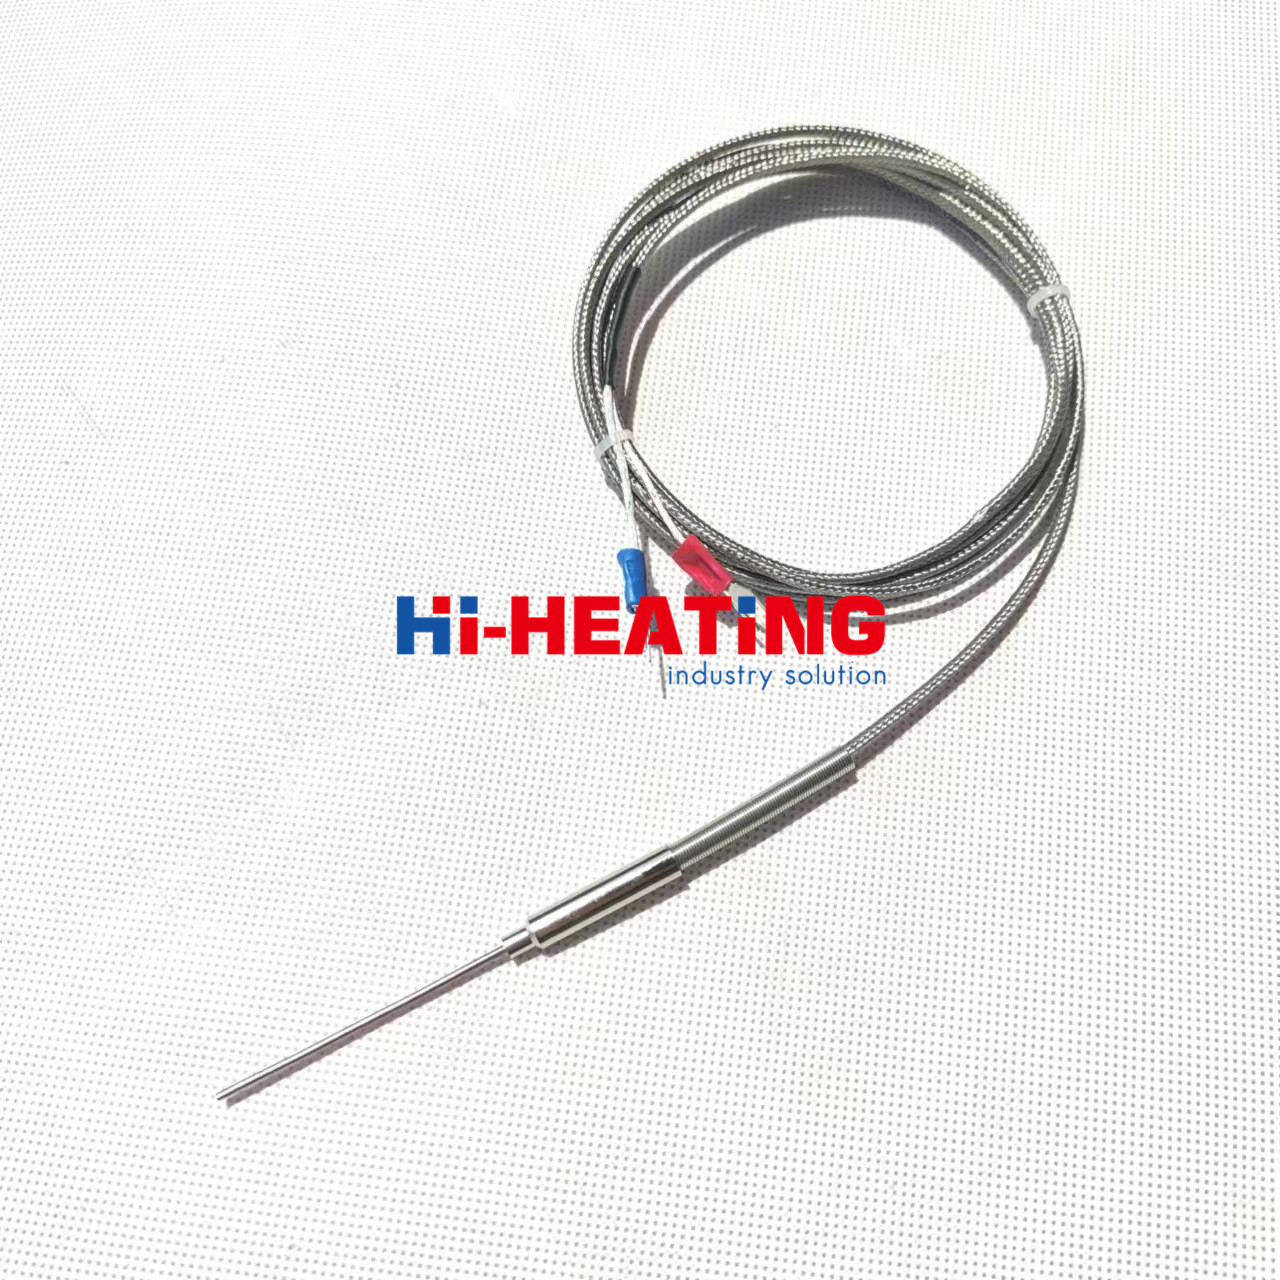 K-type J-type PT100 armored thermocouple WRNK-191/131/291R thermal resistance temperature-resistant needle type can be bent